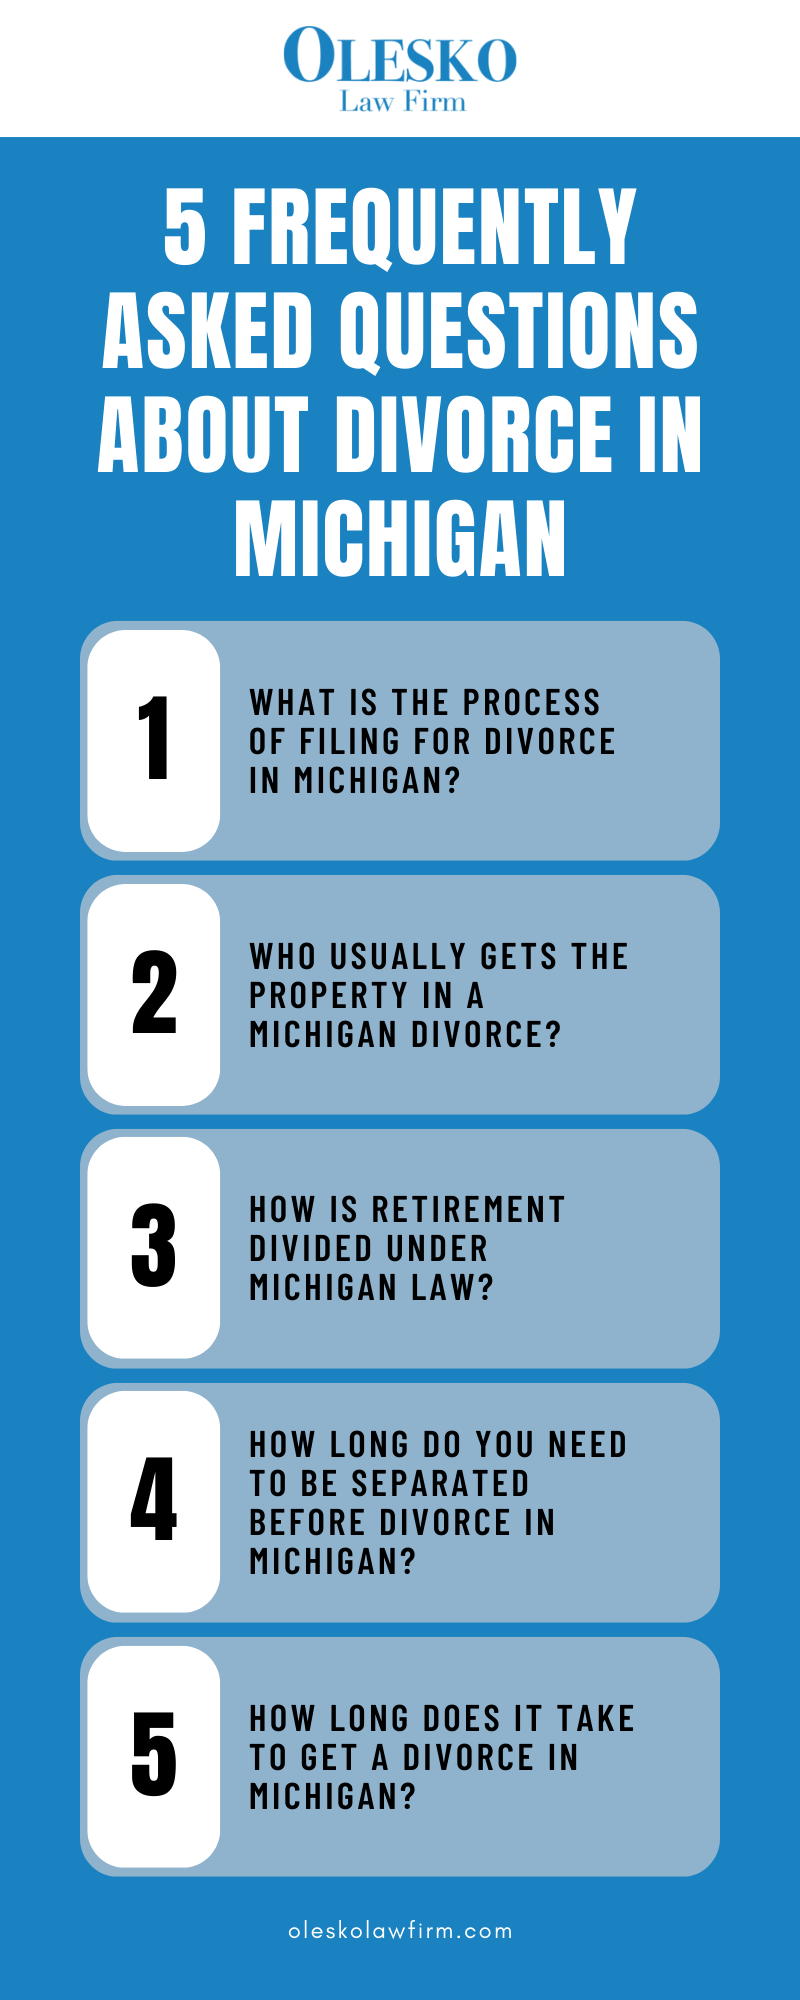 5 FREQUENTLY ASKED QUESTIONS ABOUT DIVORCE IN MICHIGAN INFOGRAPHIC